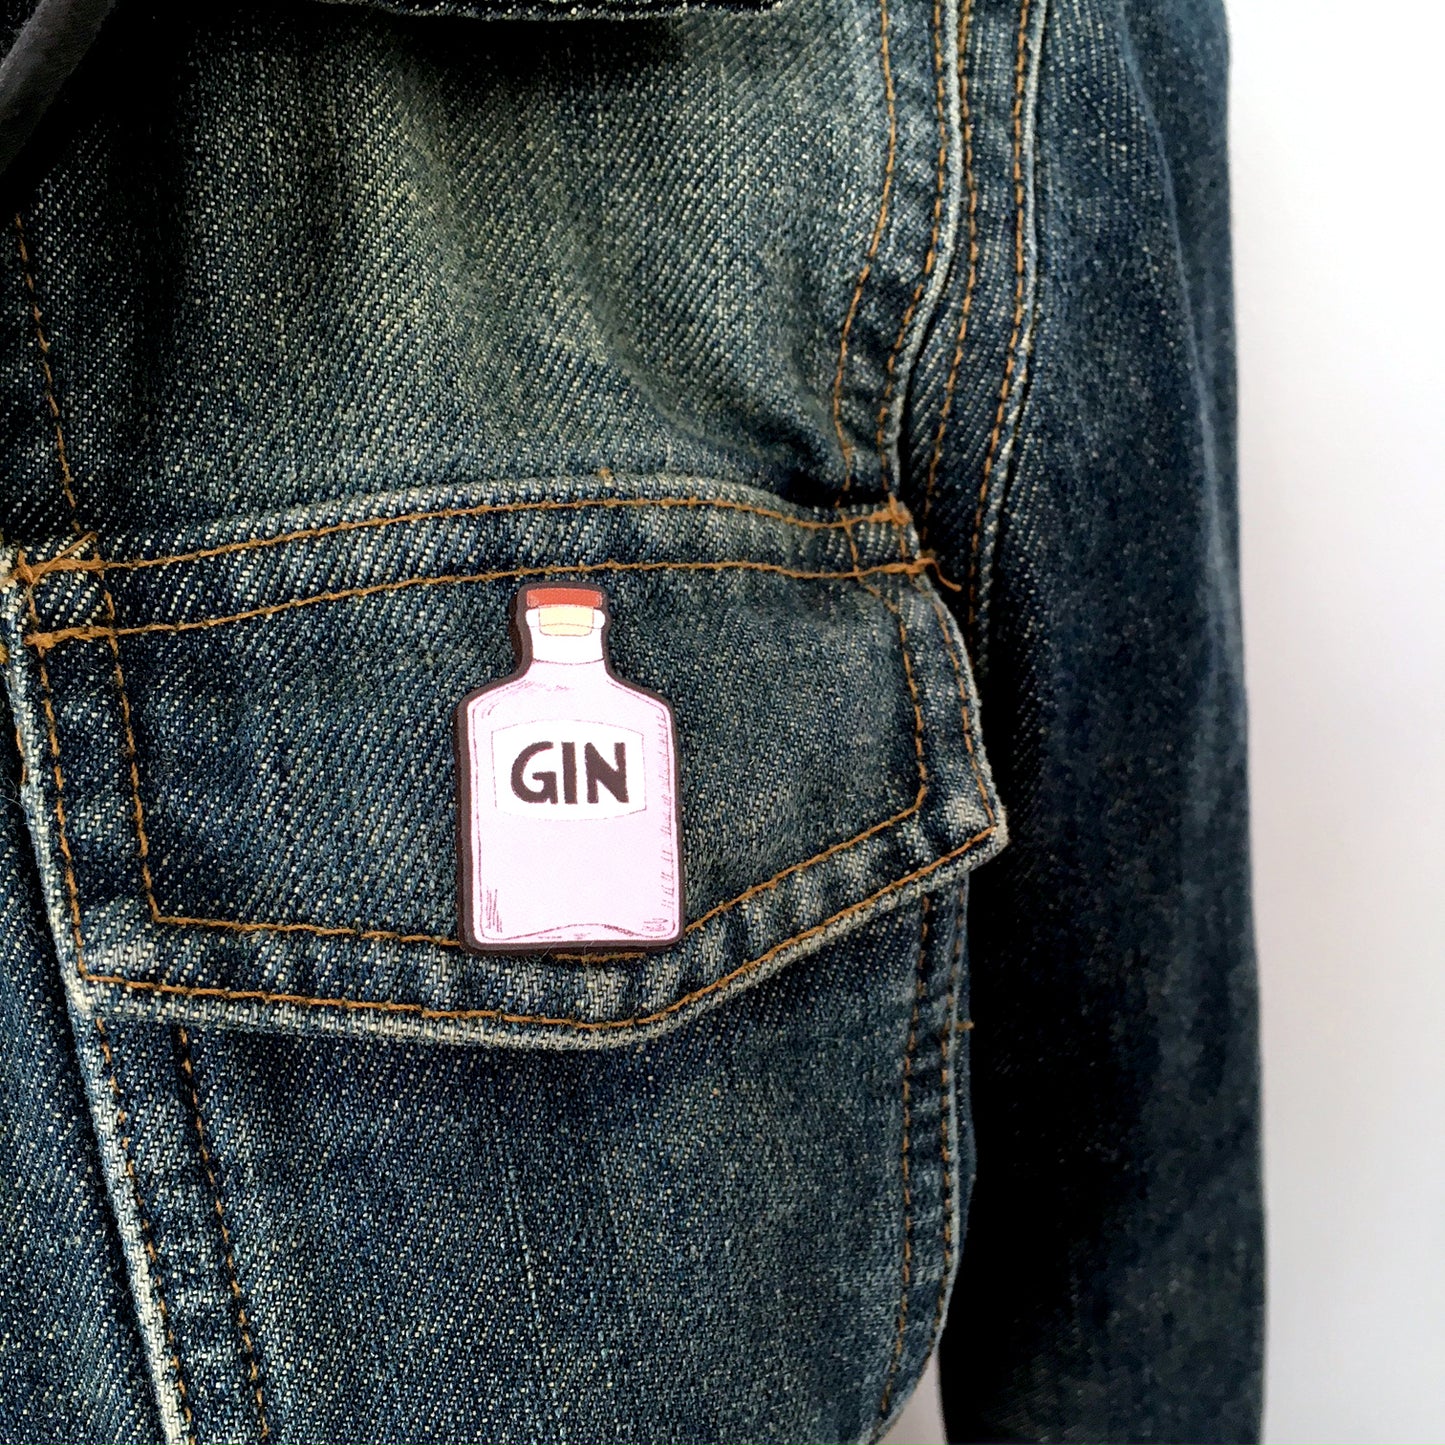 Pink gin bottle pin - Quirky gin lover gift